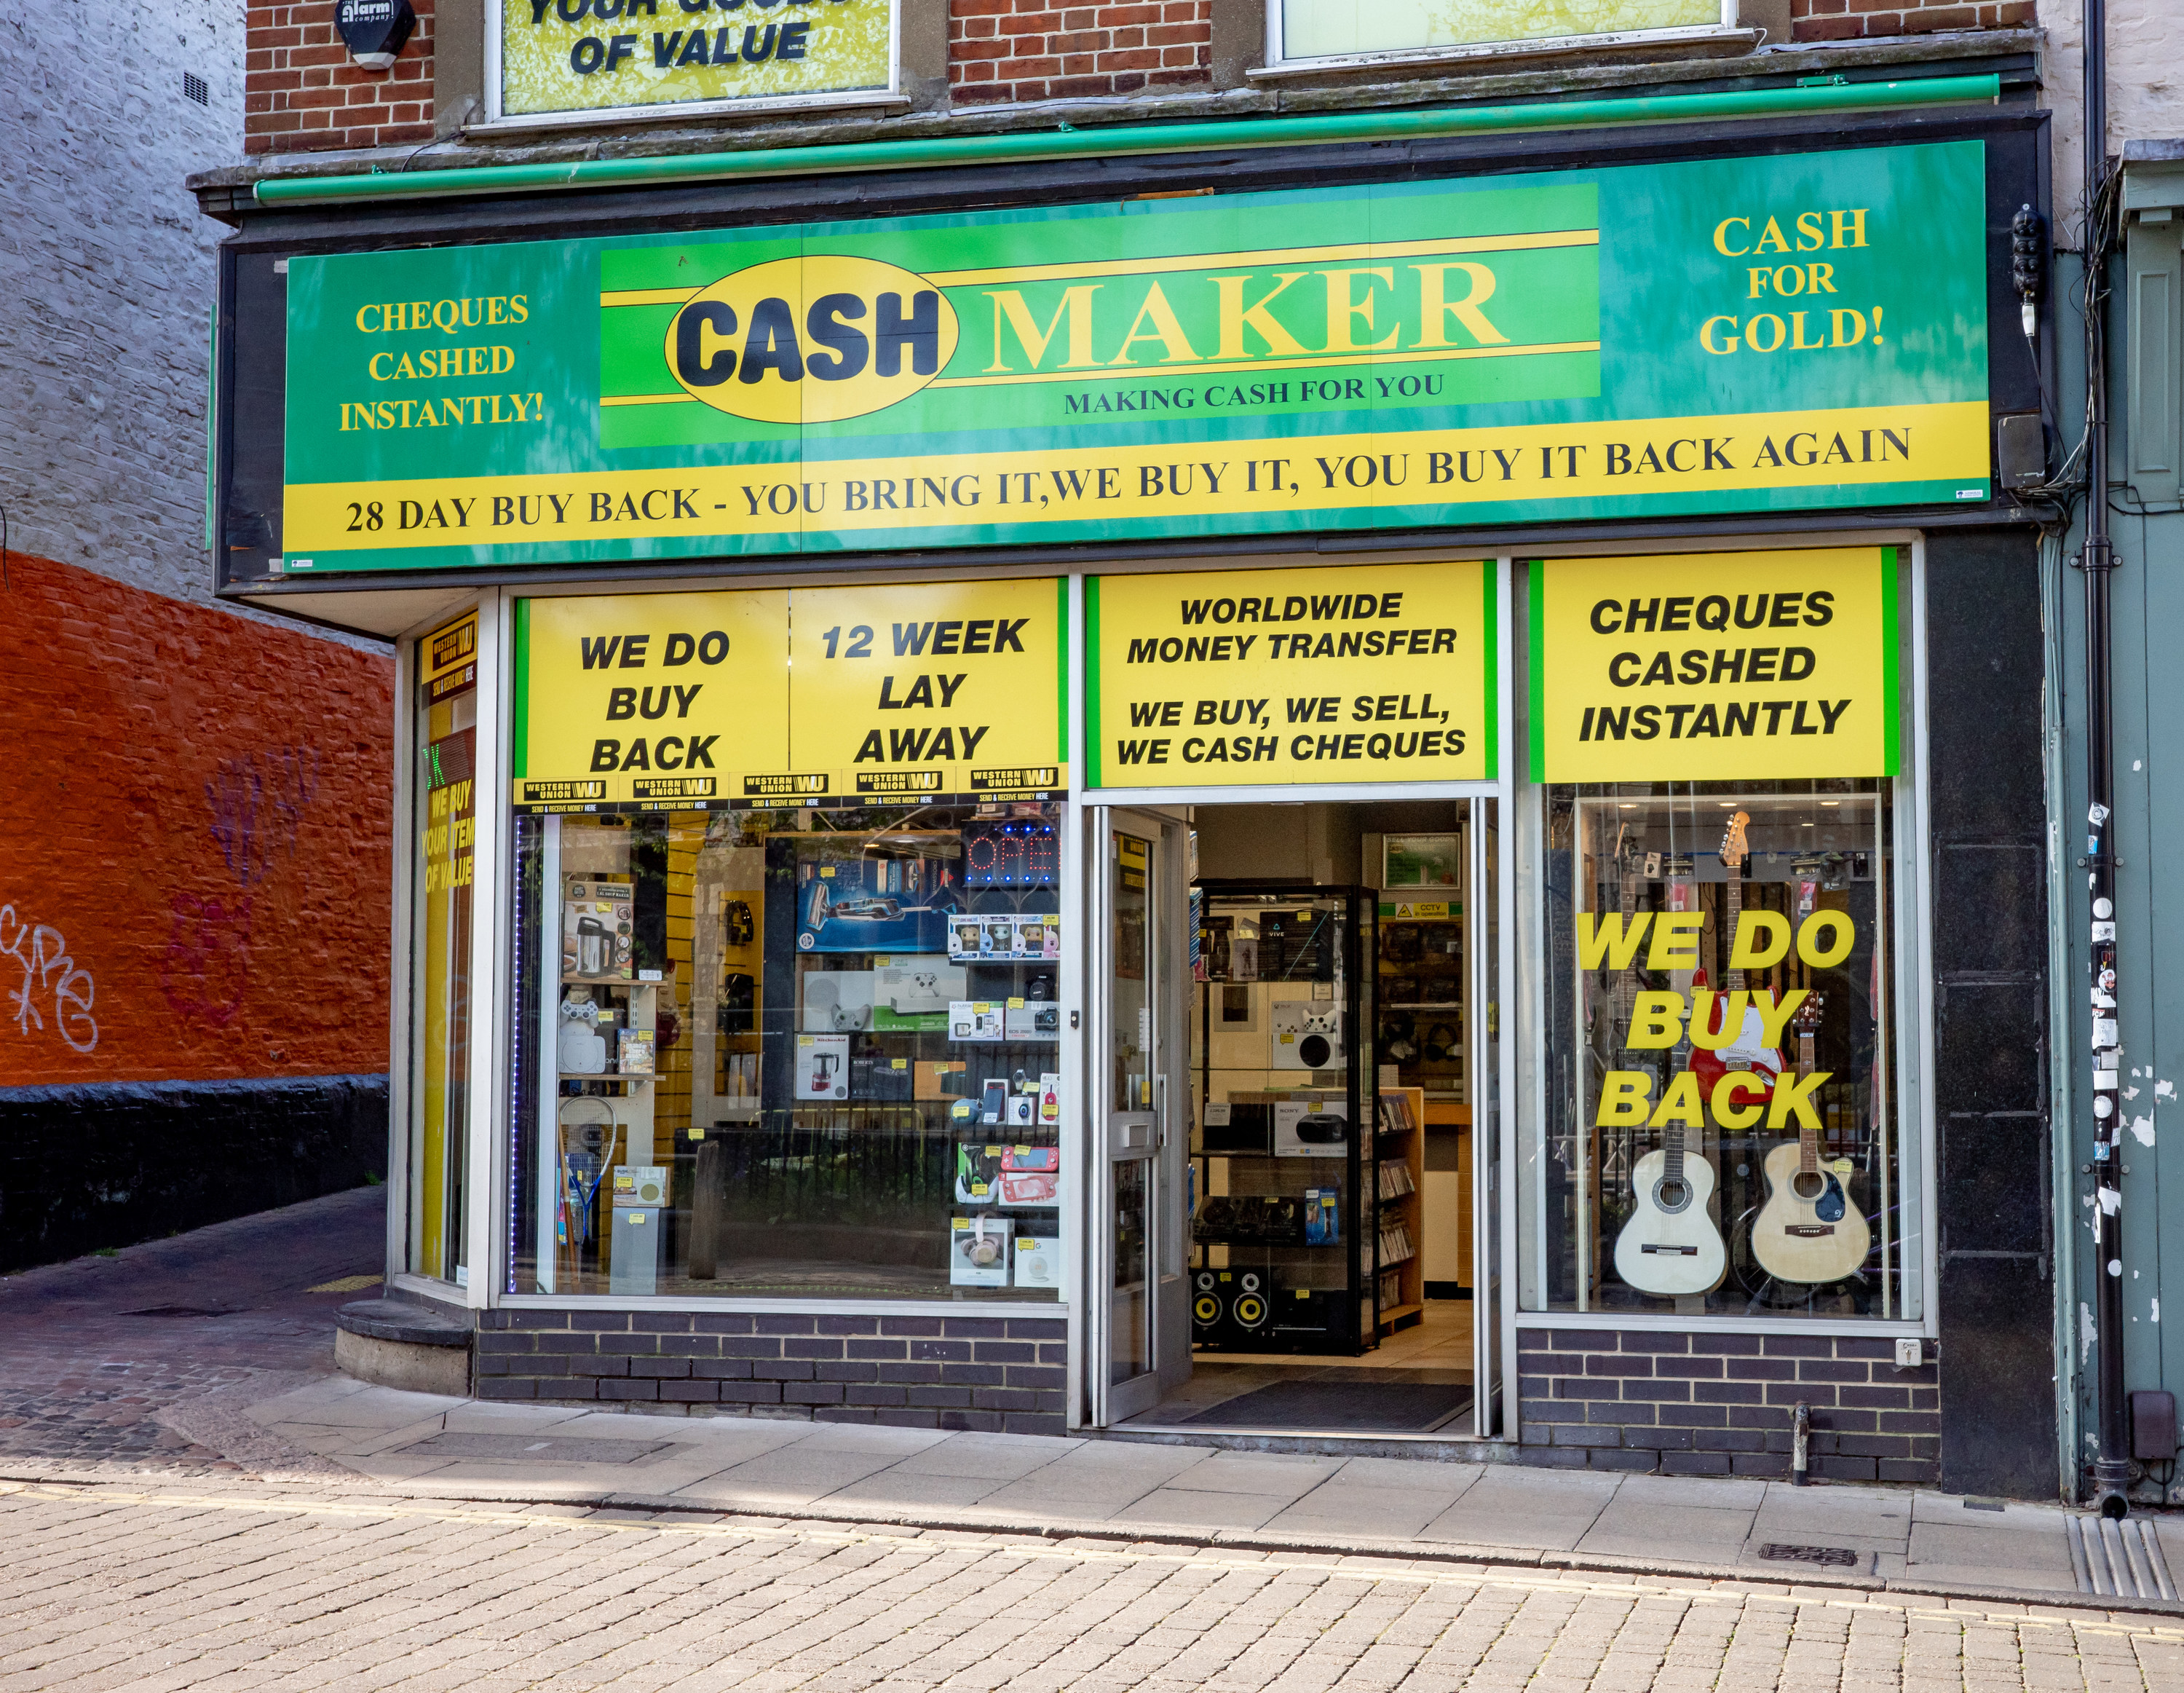 An image of a pawn shop with a green and yellow shop front with many signs, with things like &quot;We do buy back&quot; and &quot;cash for gold!&quot; written on them